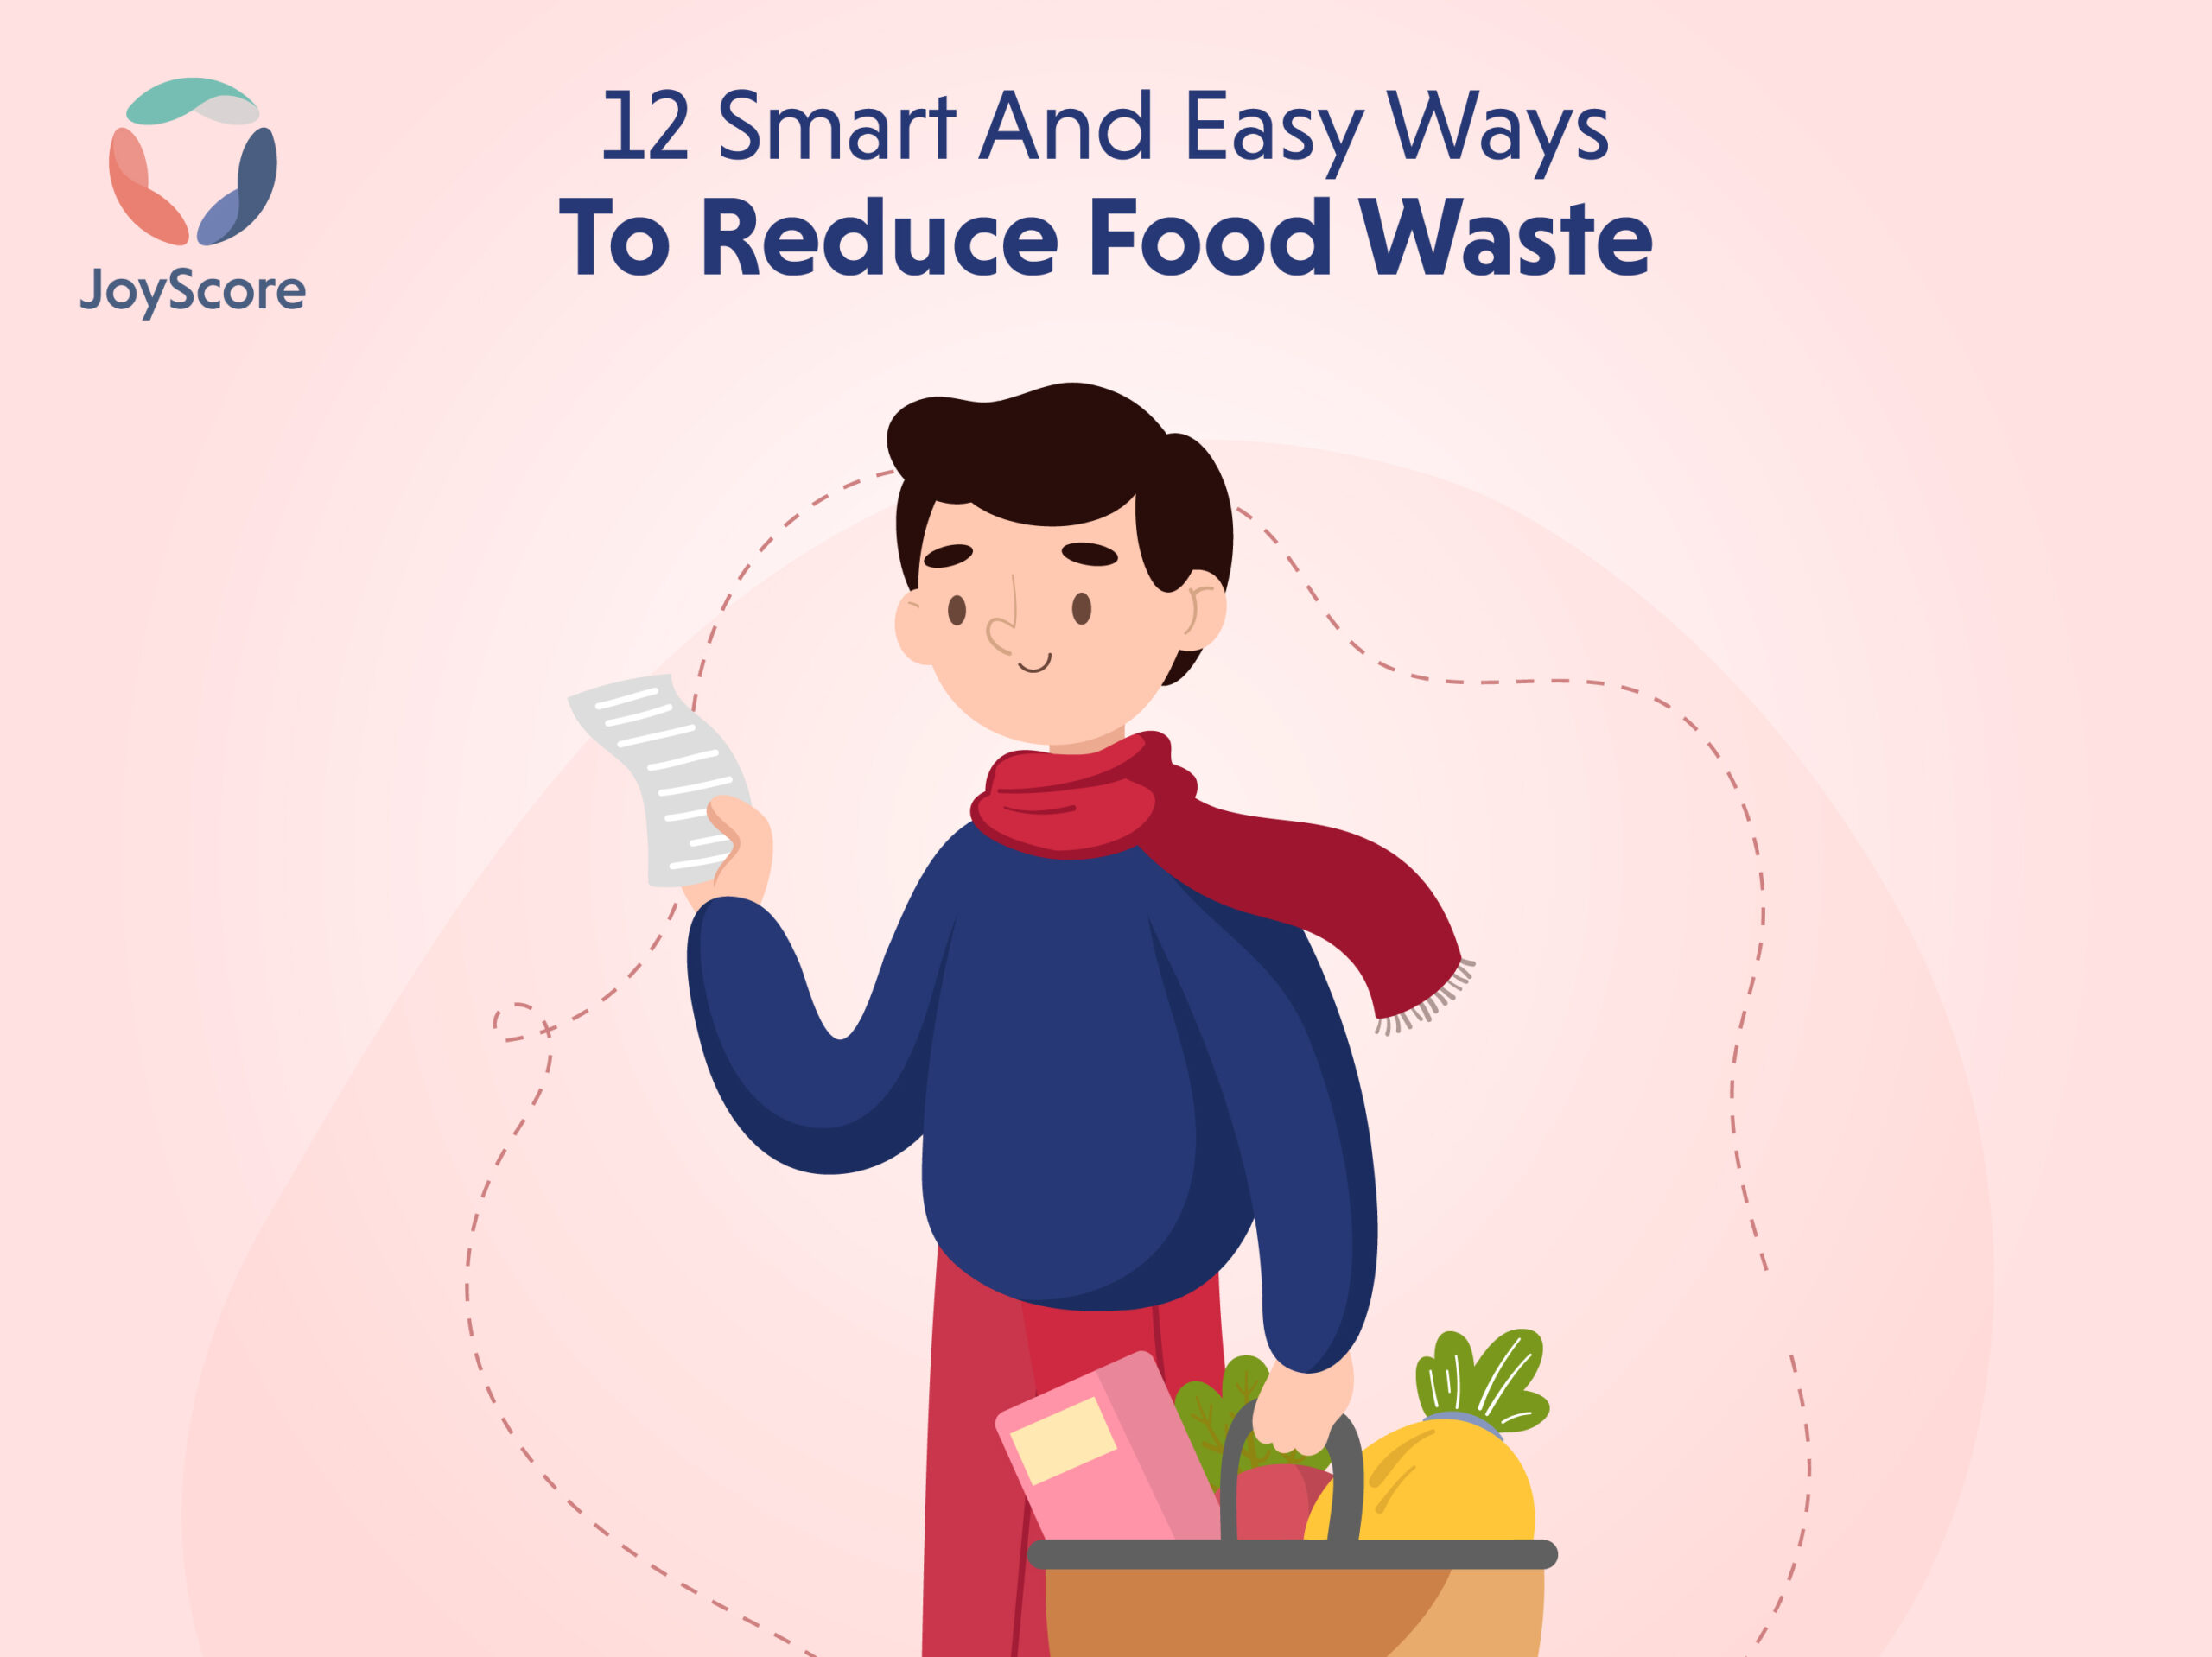 12 Smart And Easy Ways To Reduce Food Waste